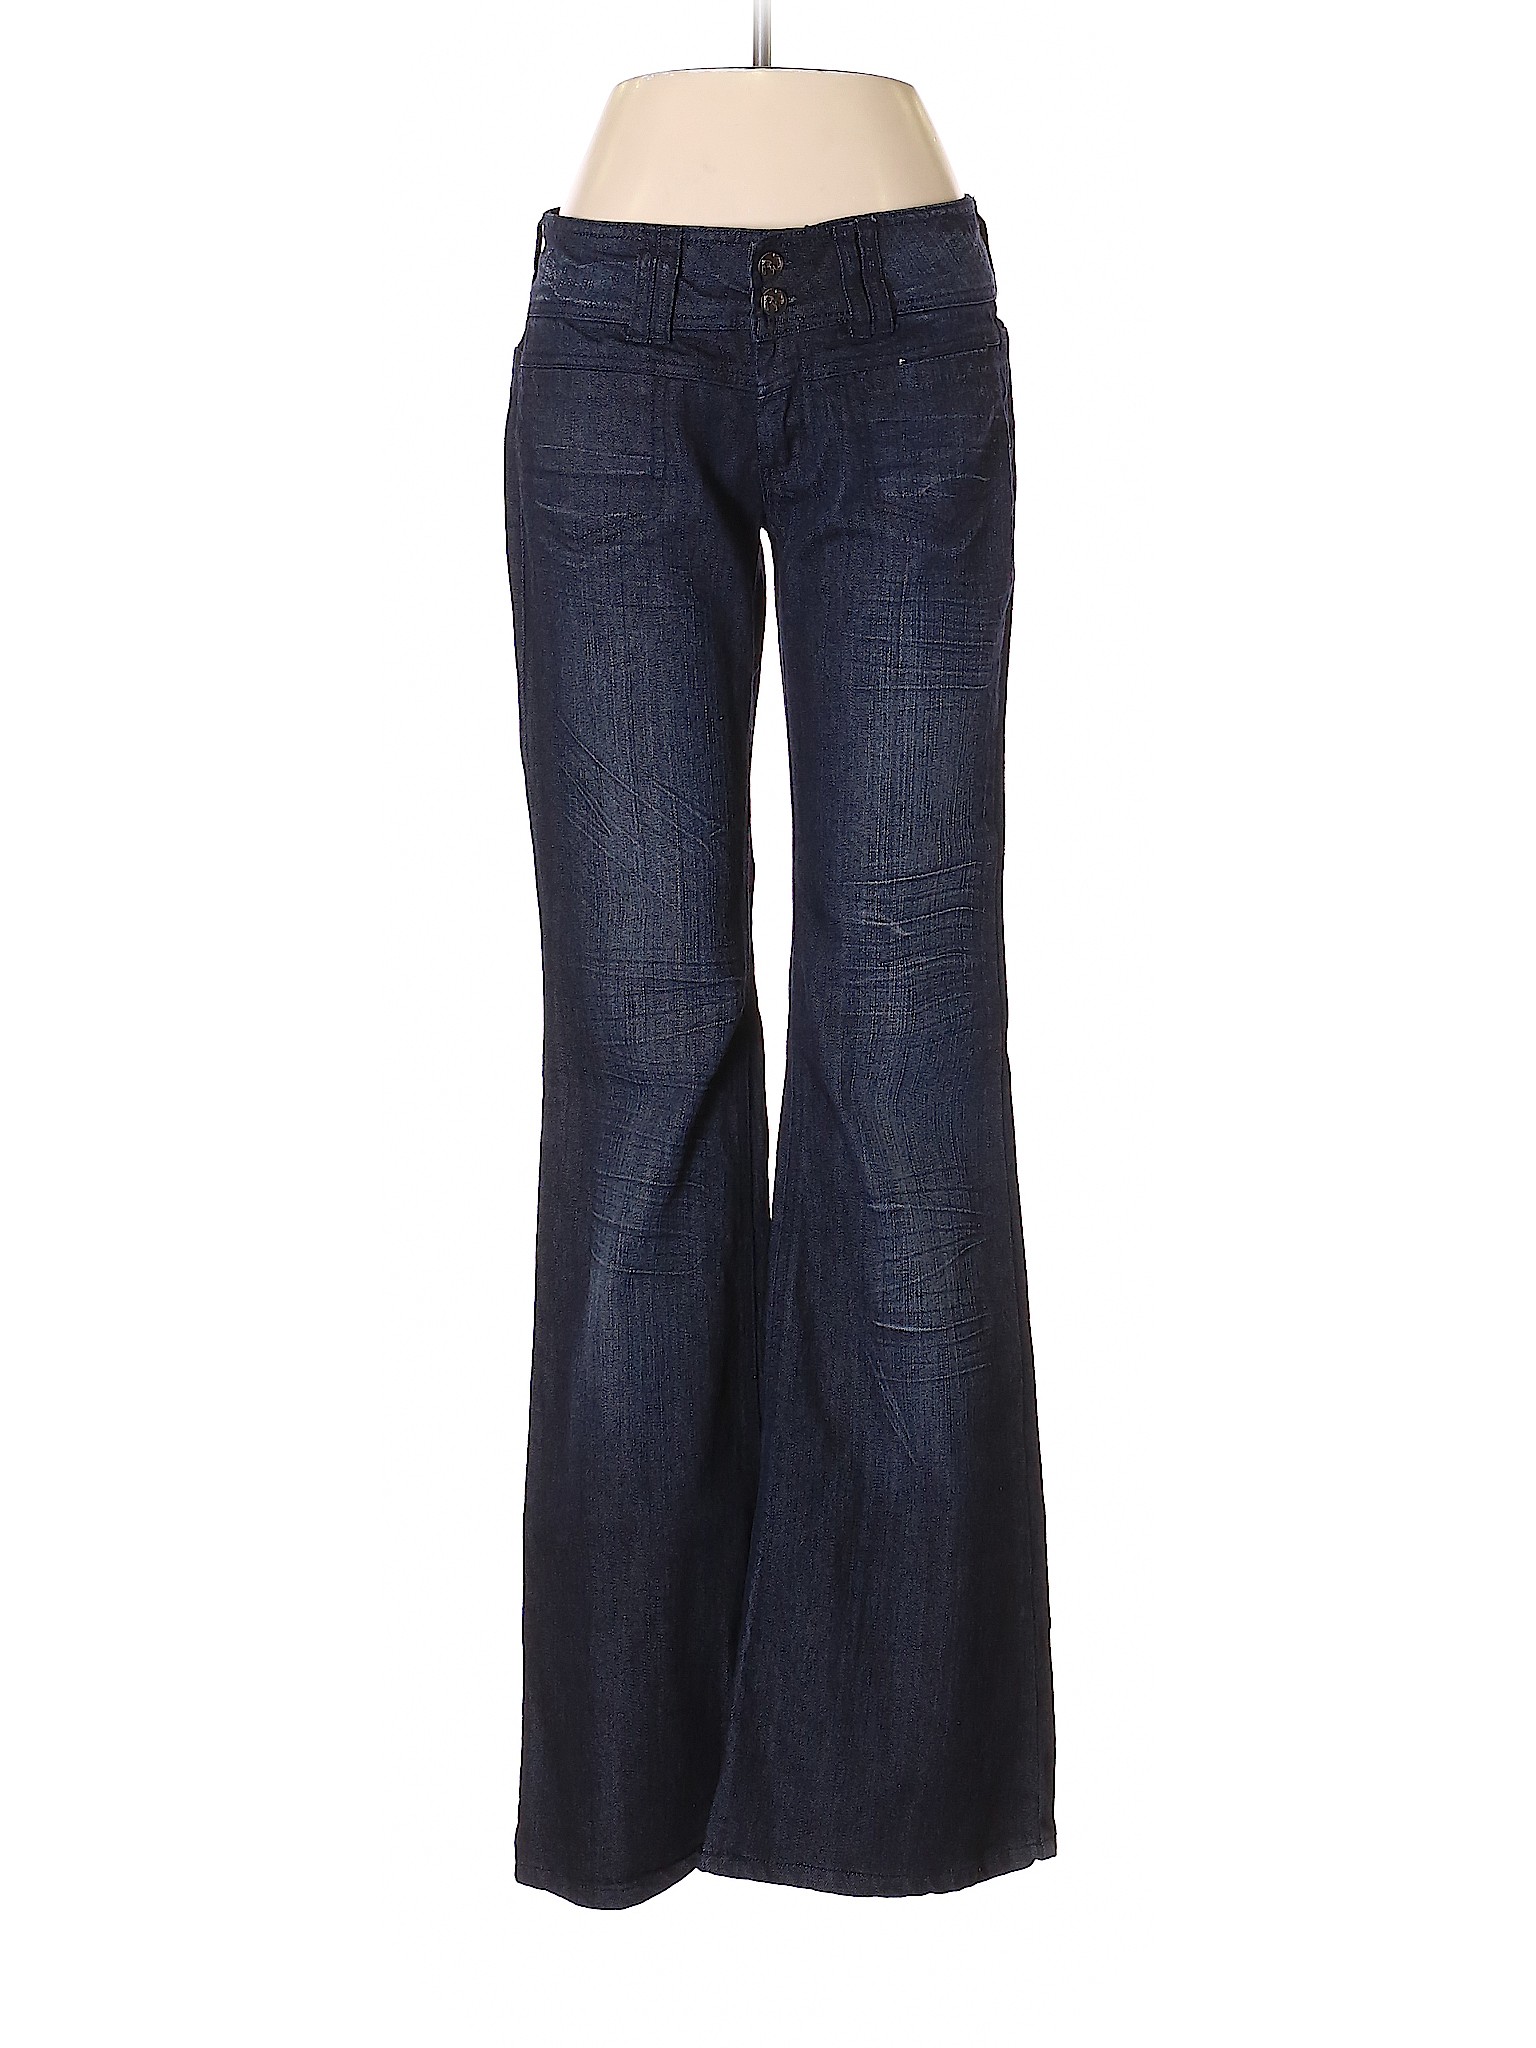 Rampage Solid Blue Jeans Size 9 - 89% off | thredUP